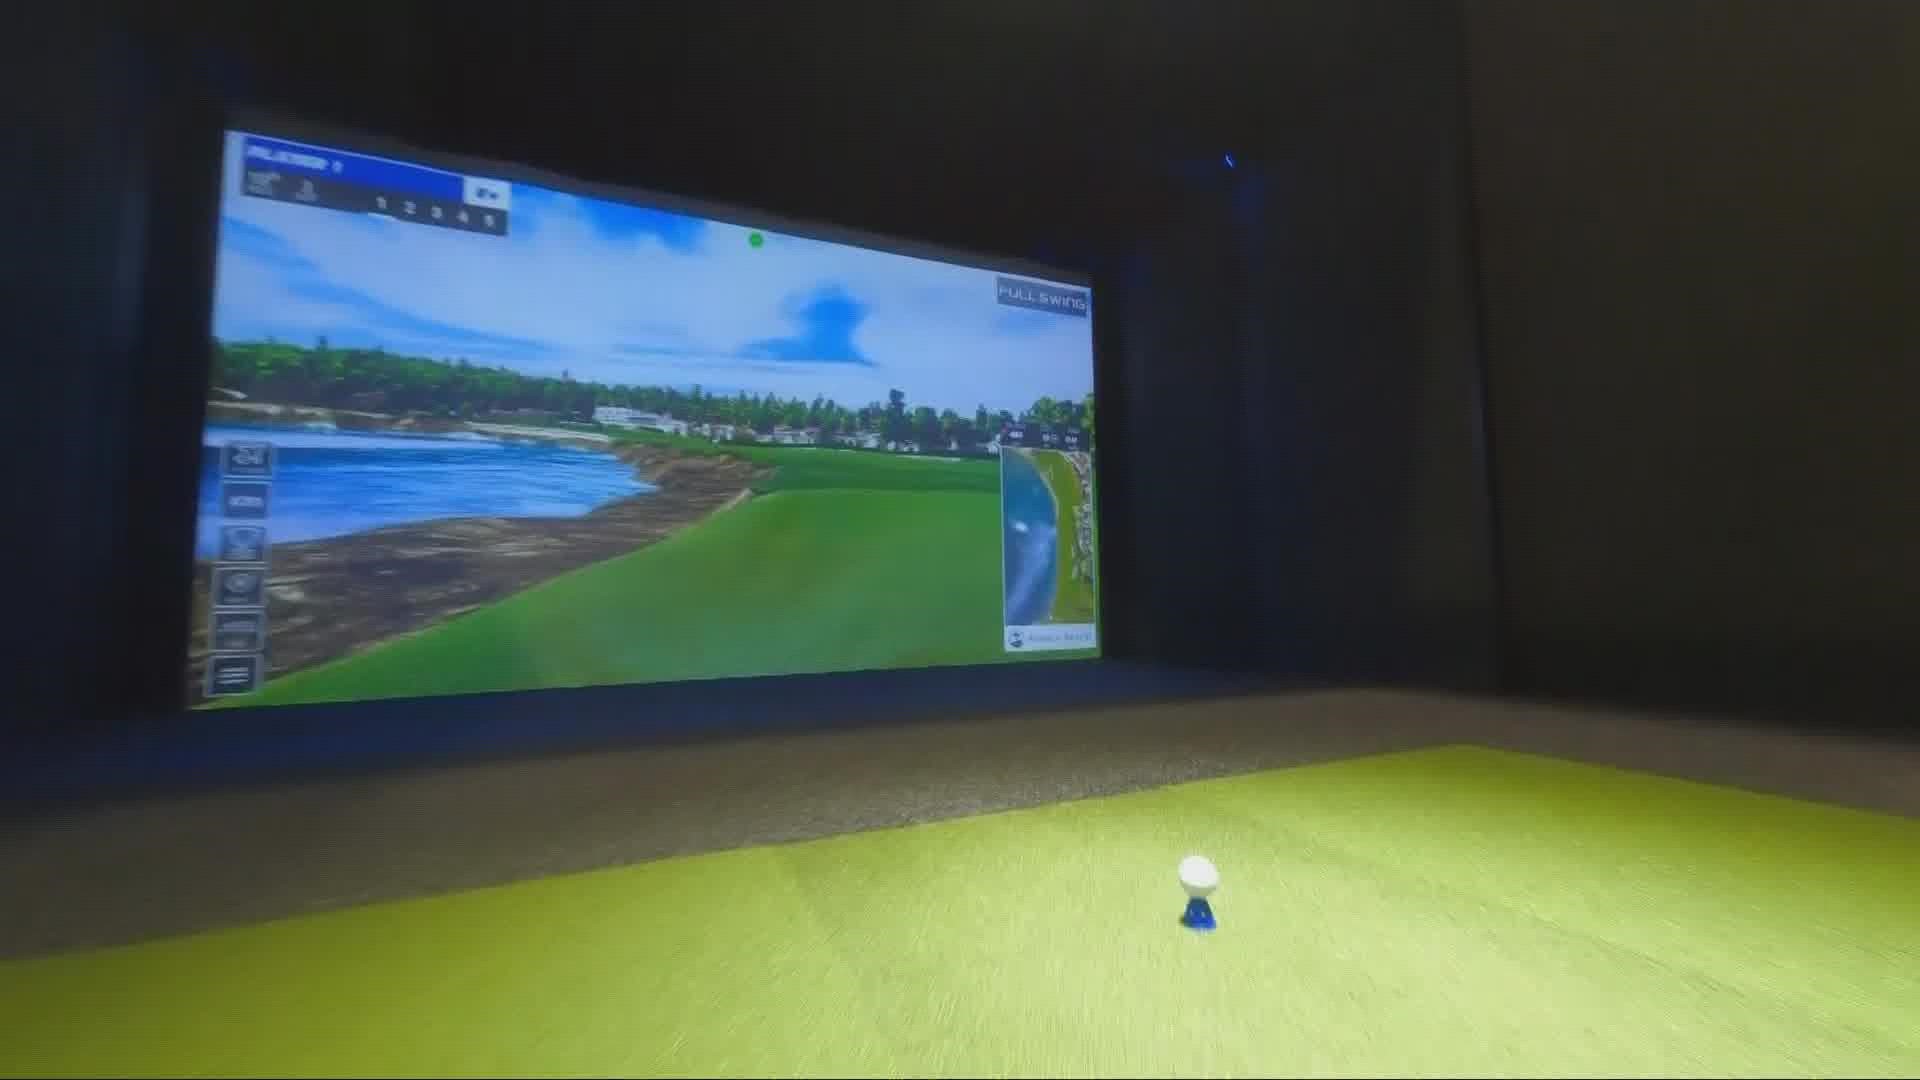 The golf simulator and sports bar are open year-round.